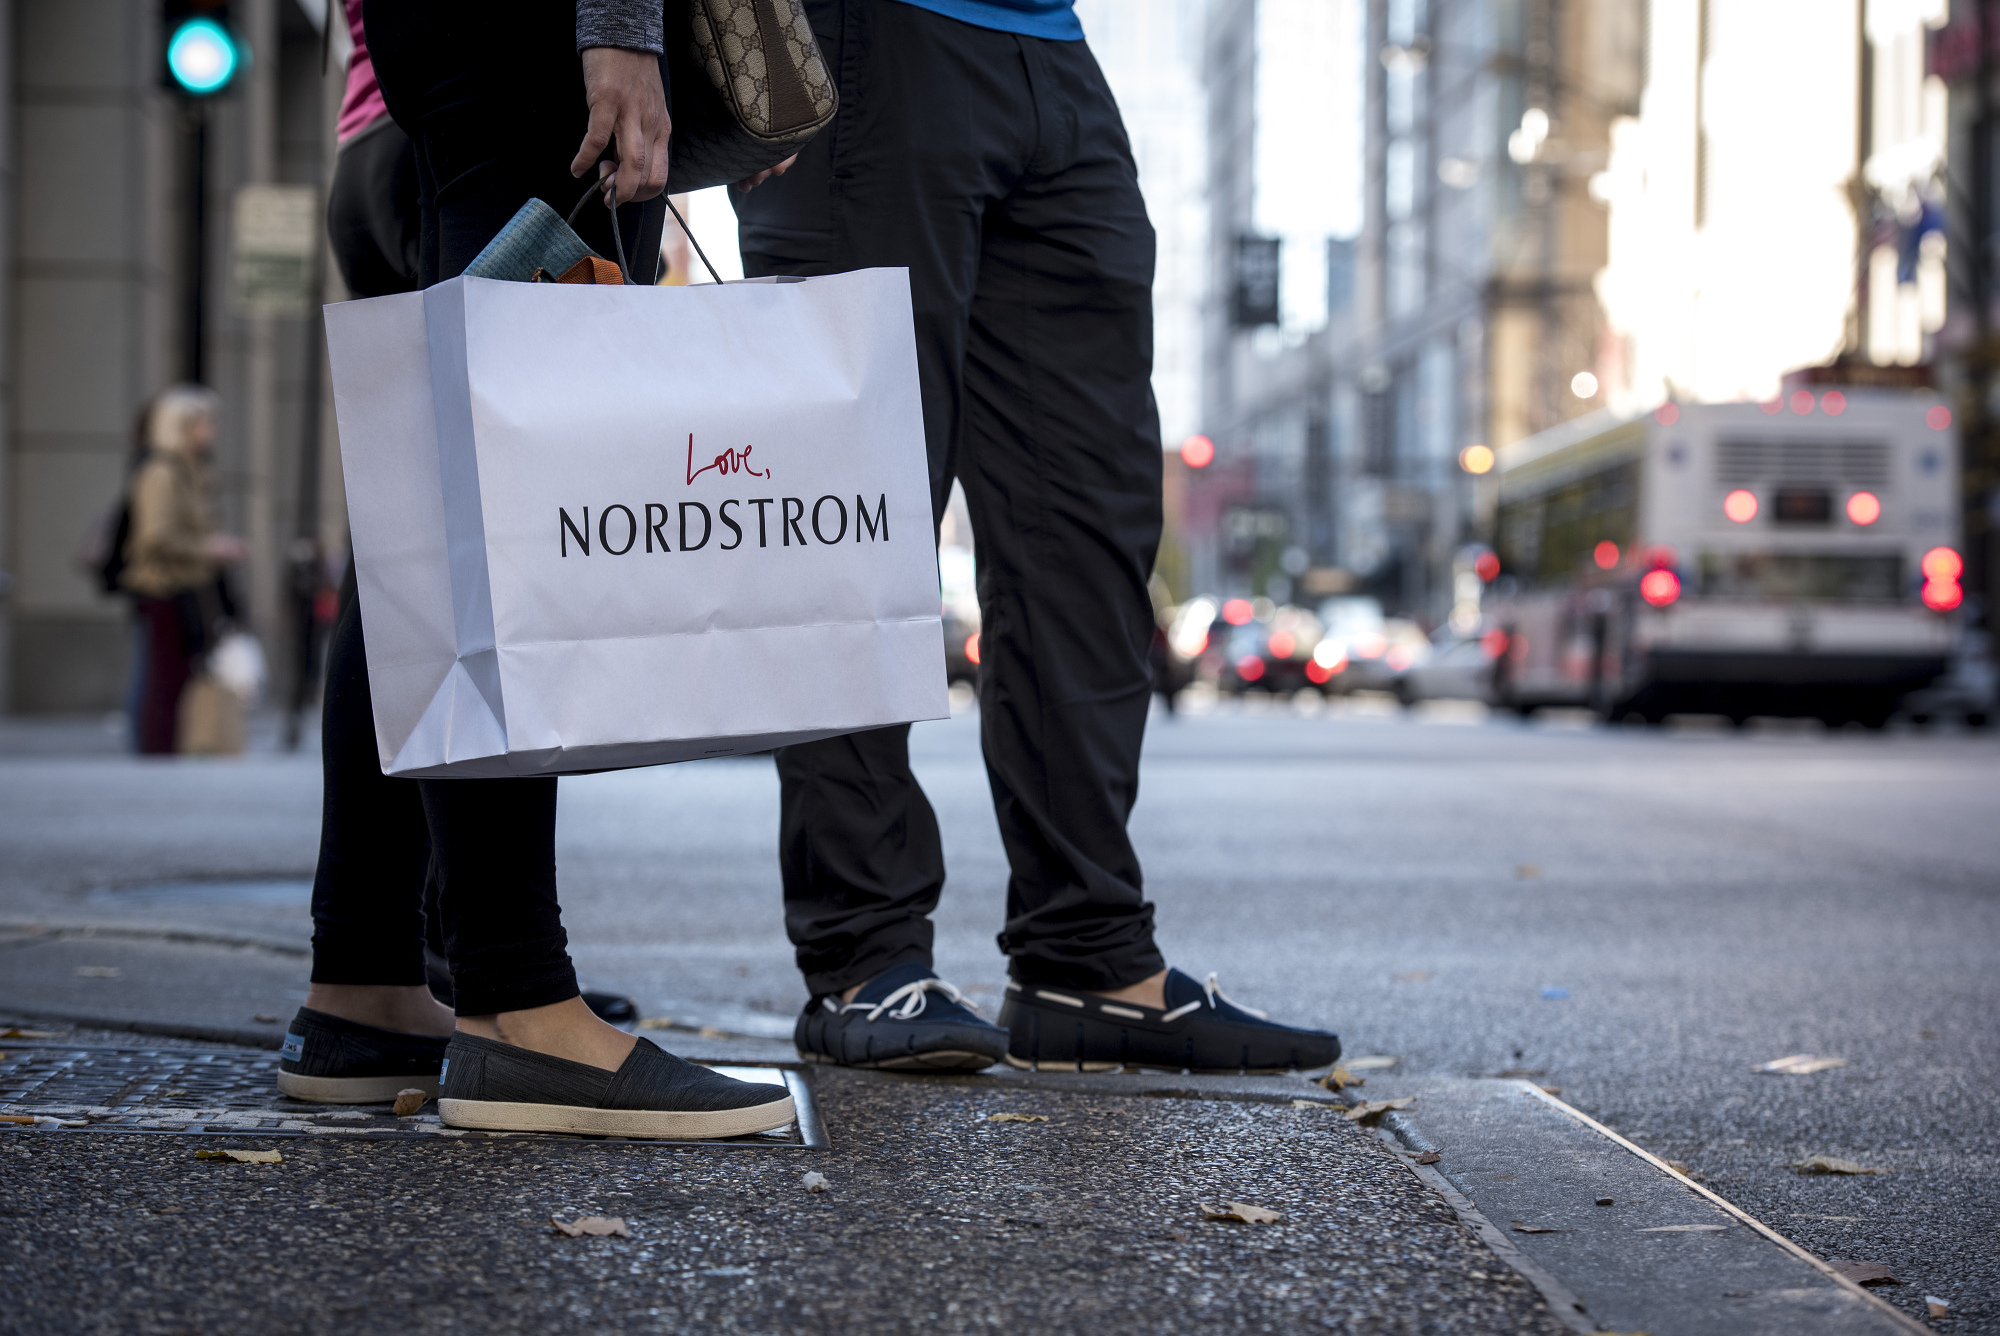 Nordstrom Targets Younger Shoppers With Topshop Investment - Bloomberg